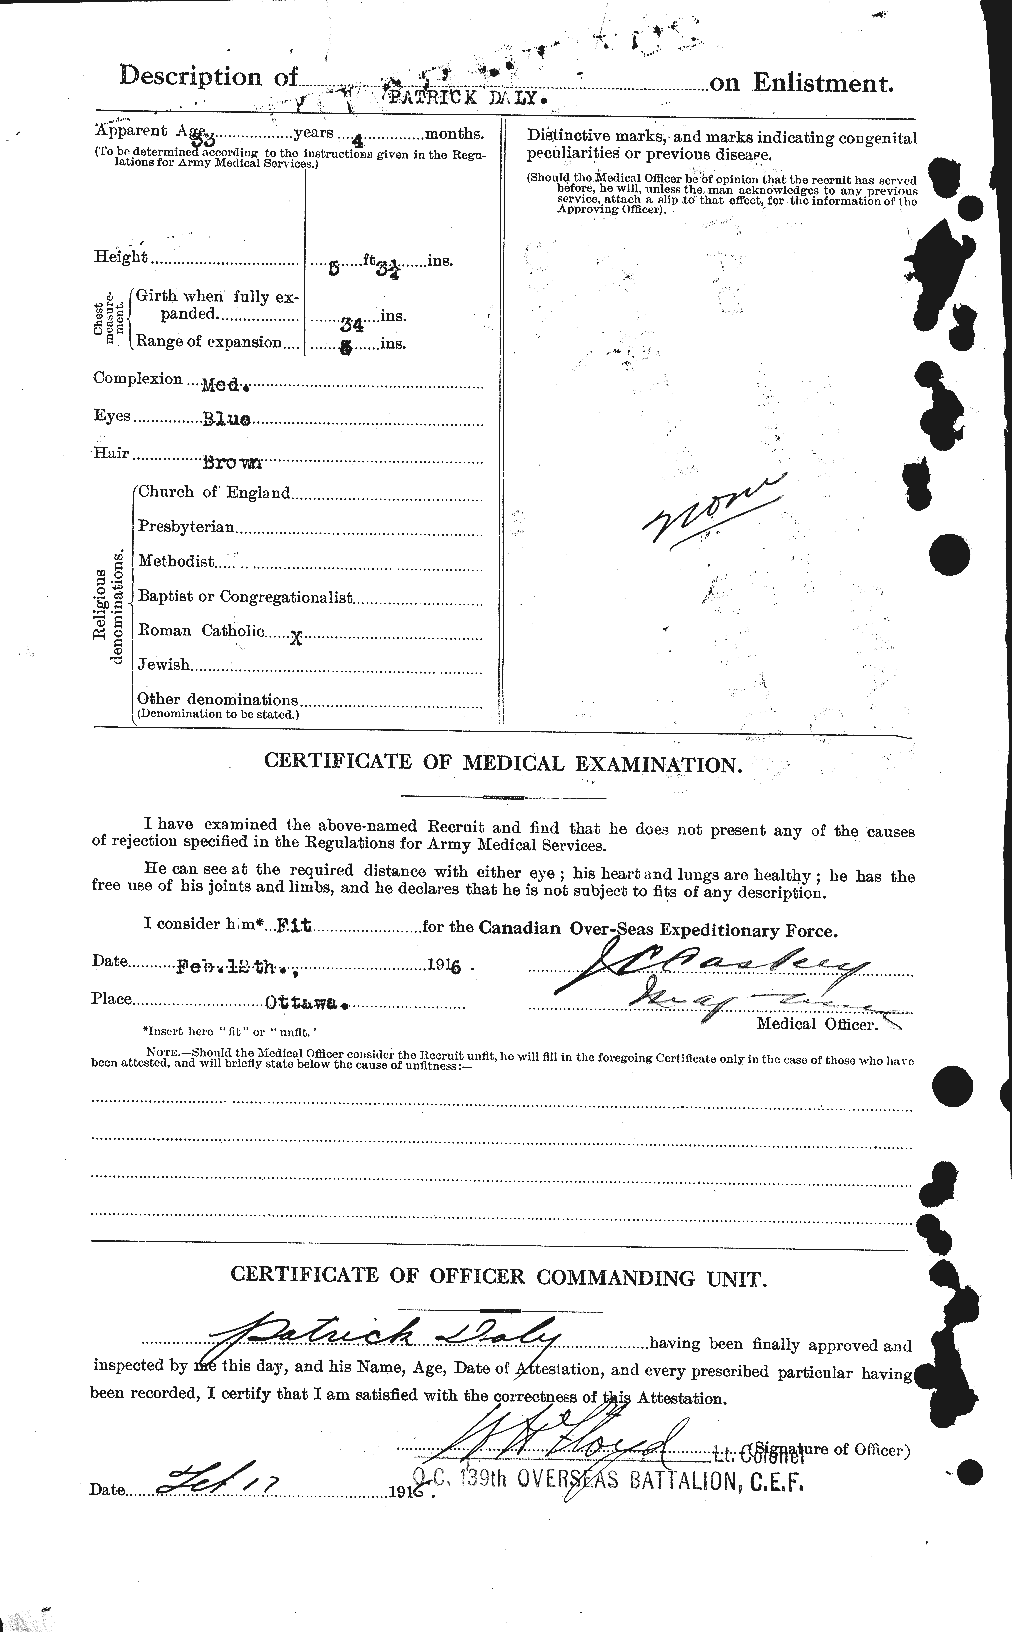 Personnel Records of the First World War - CEF 276388b